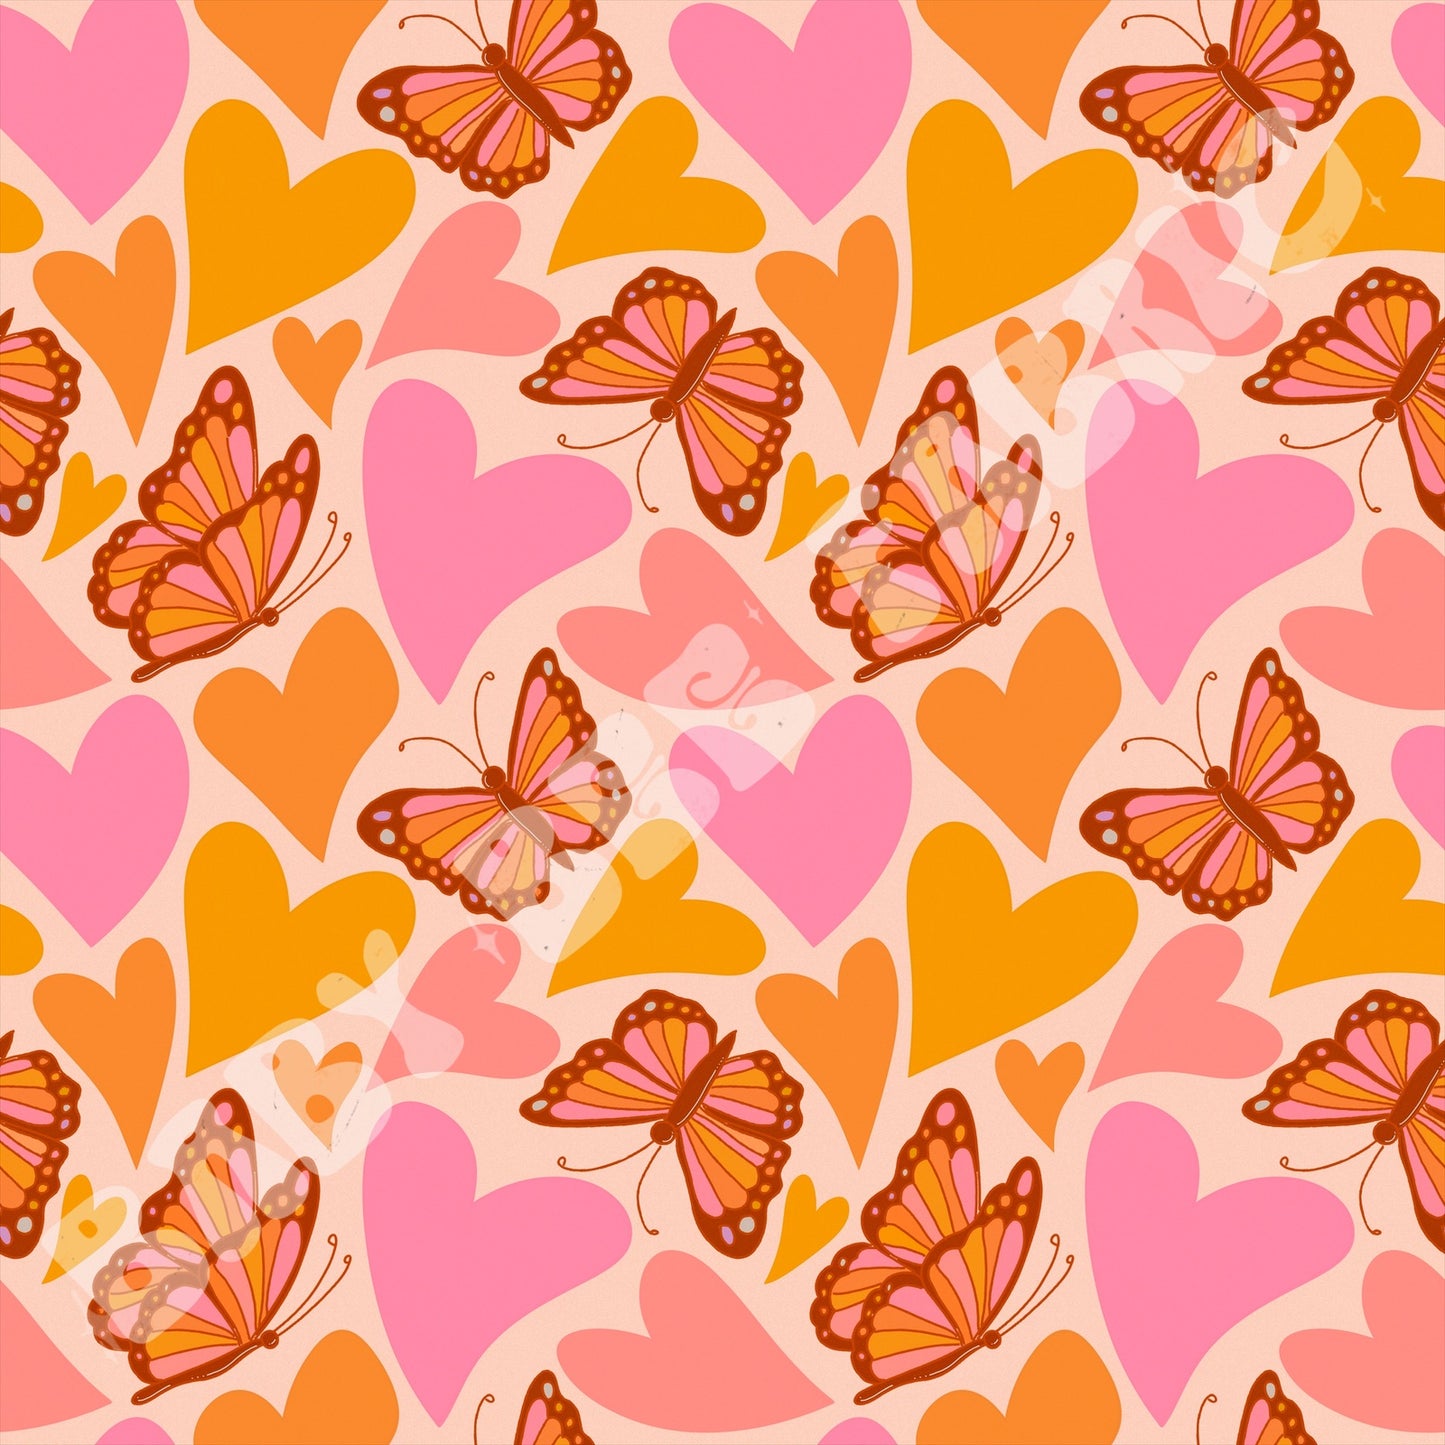 Give me Butterflies